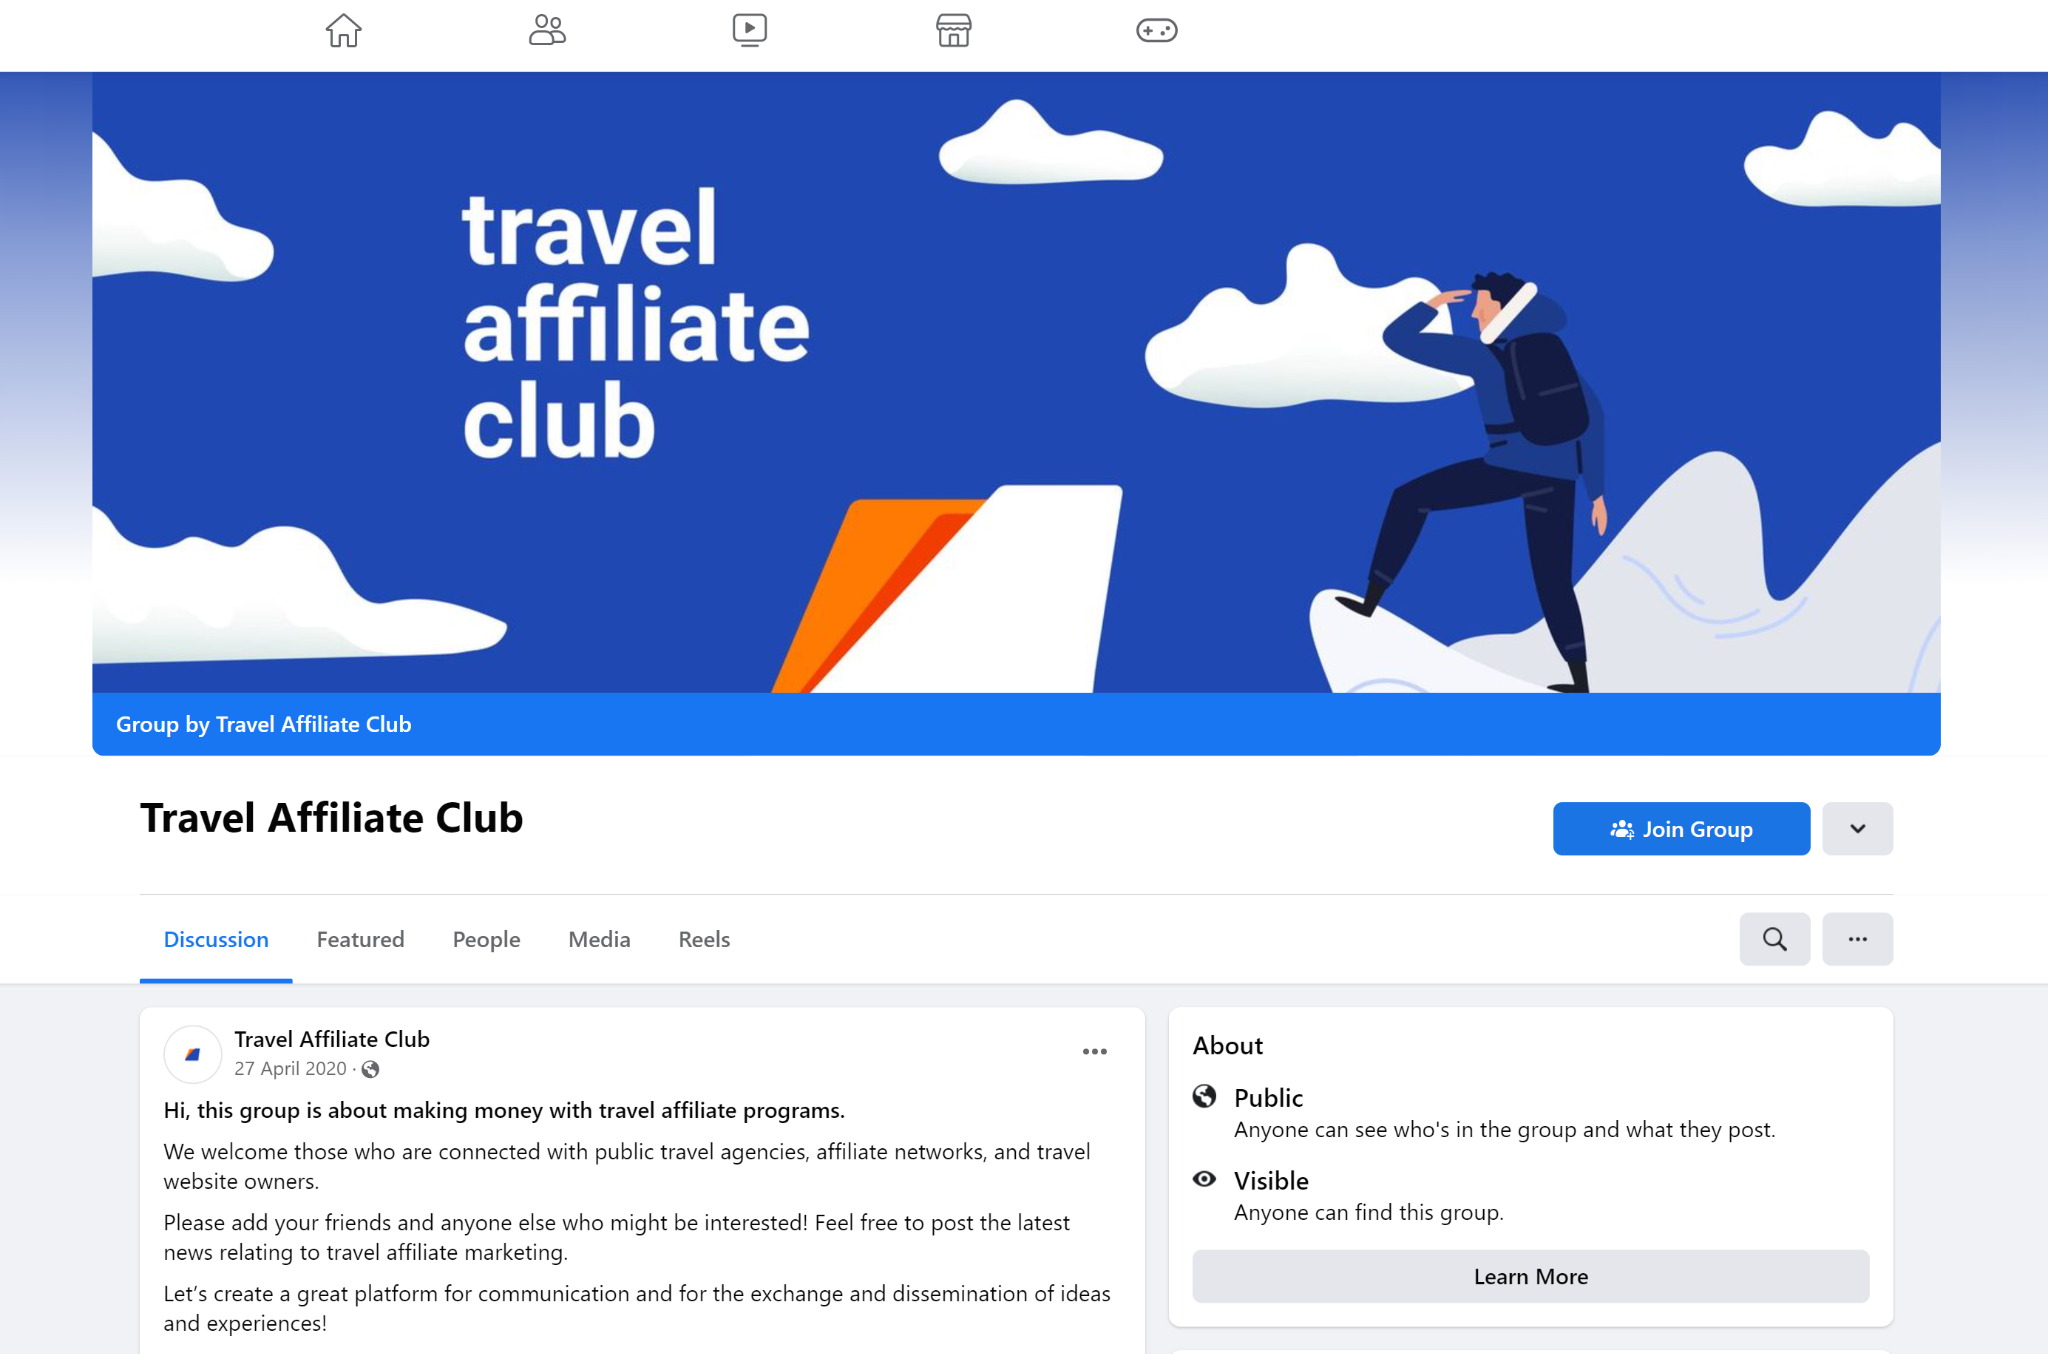 A screenshot featuring the Travel Affiliate Club Facebook page